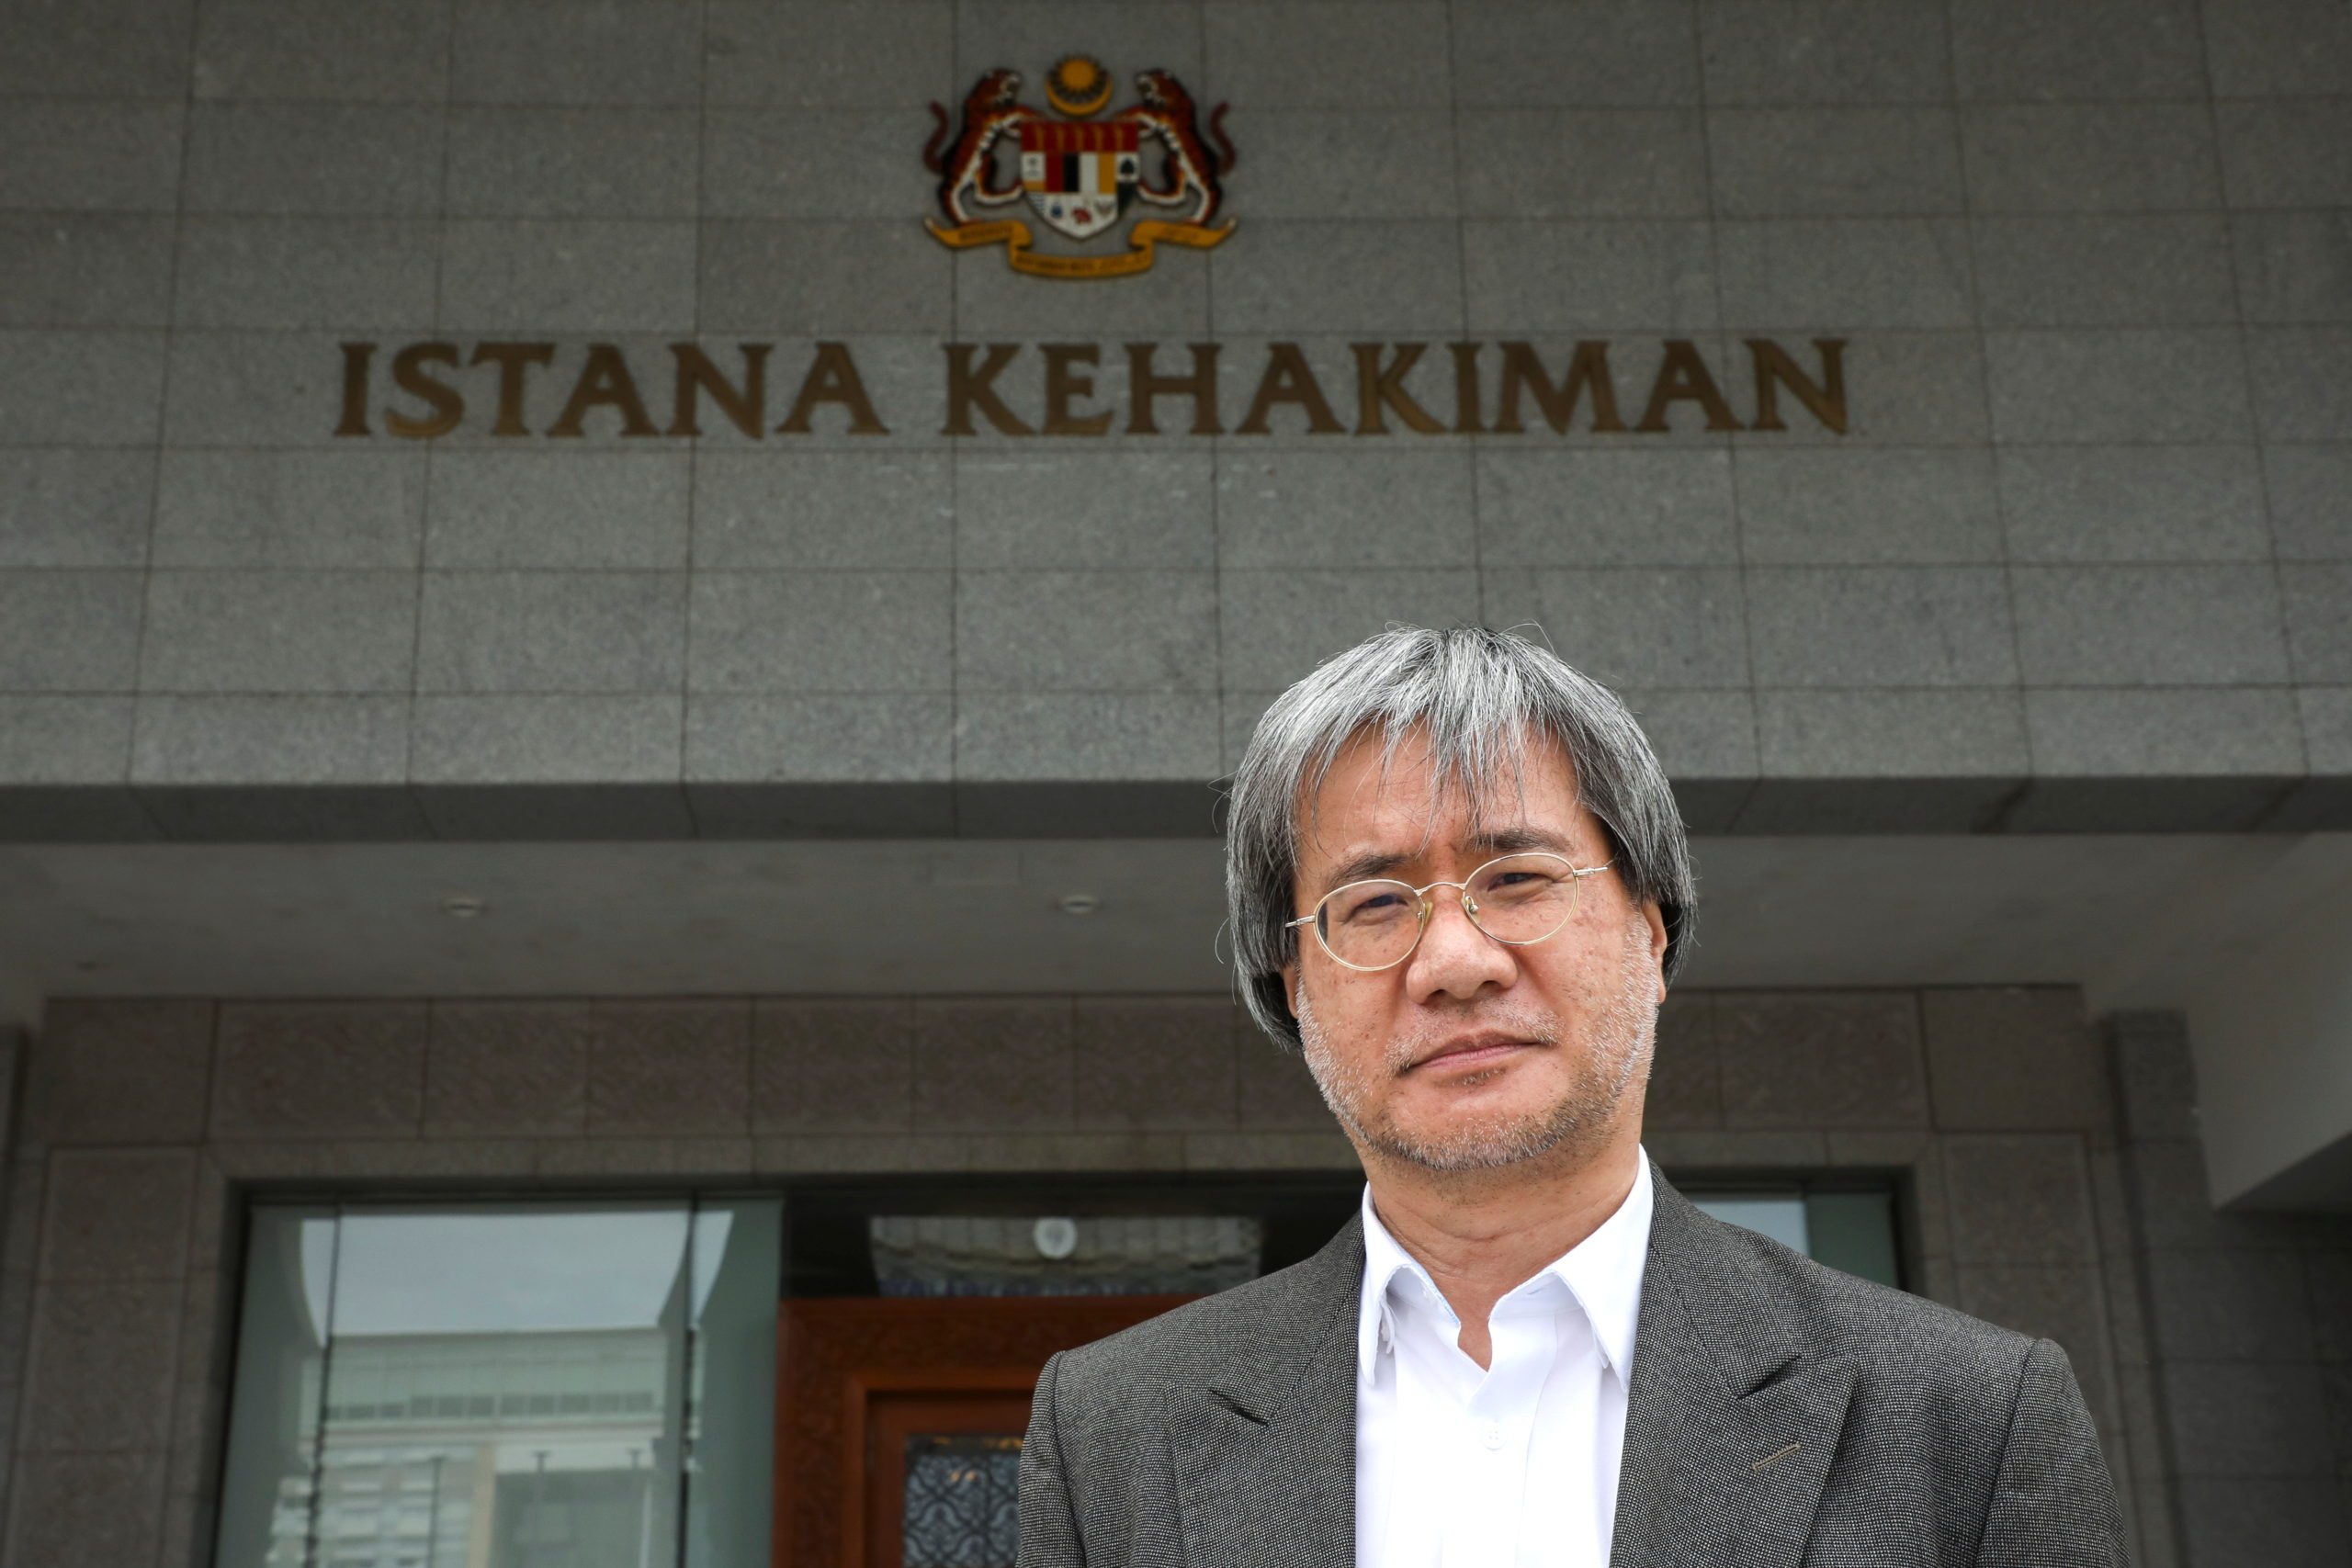 Malaysiakini's editor-in-chief Steven Gan poses for a picture outside the Federal Court in Putrajaya